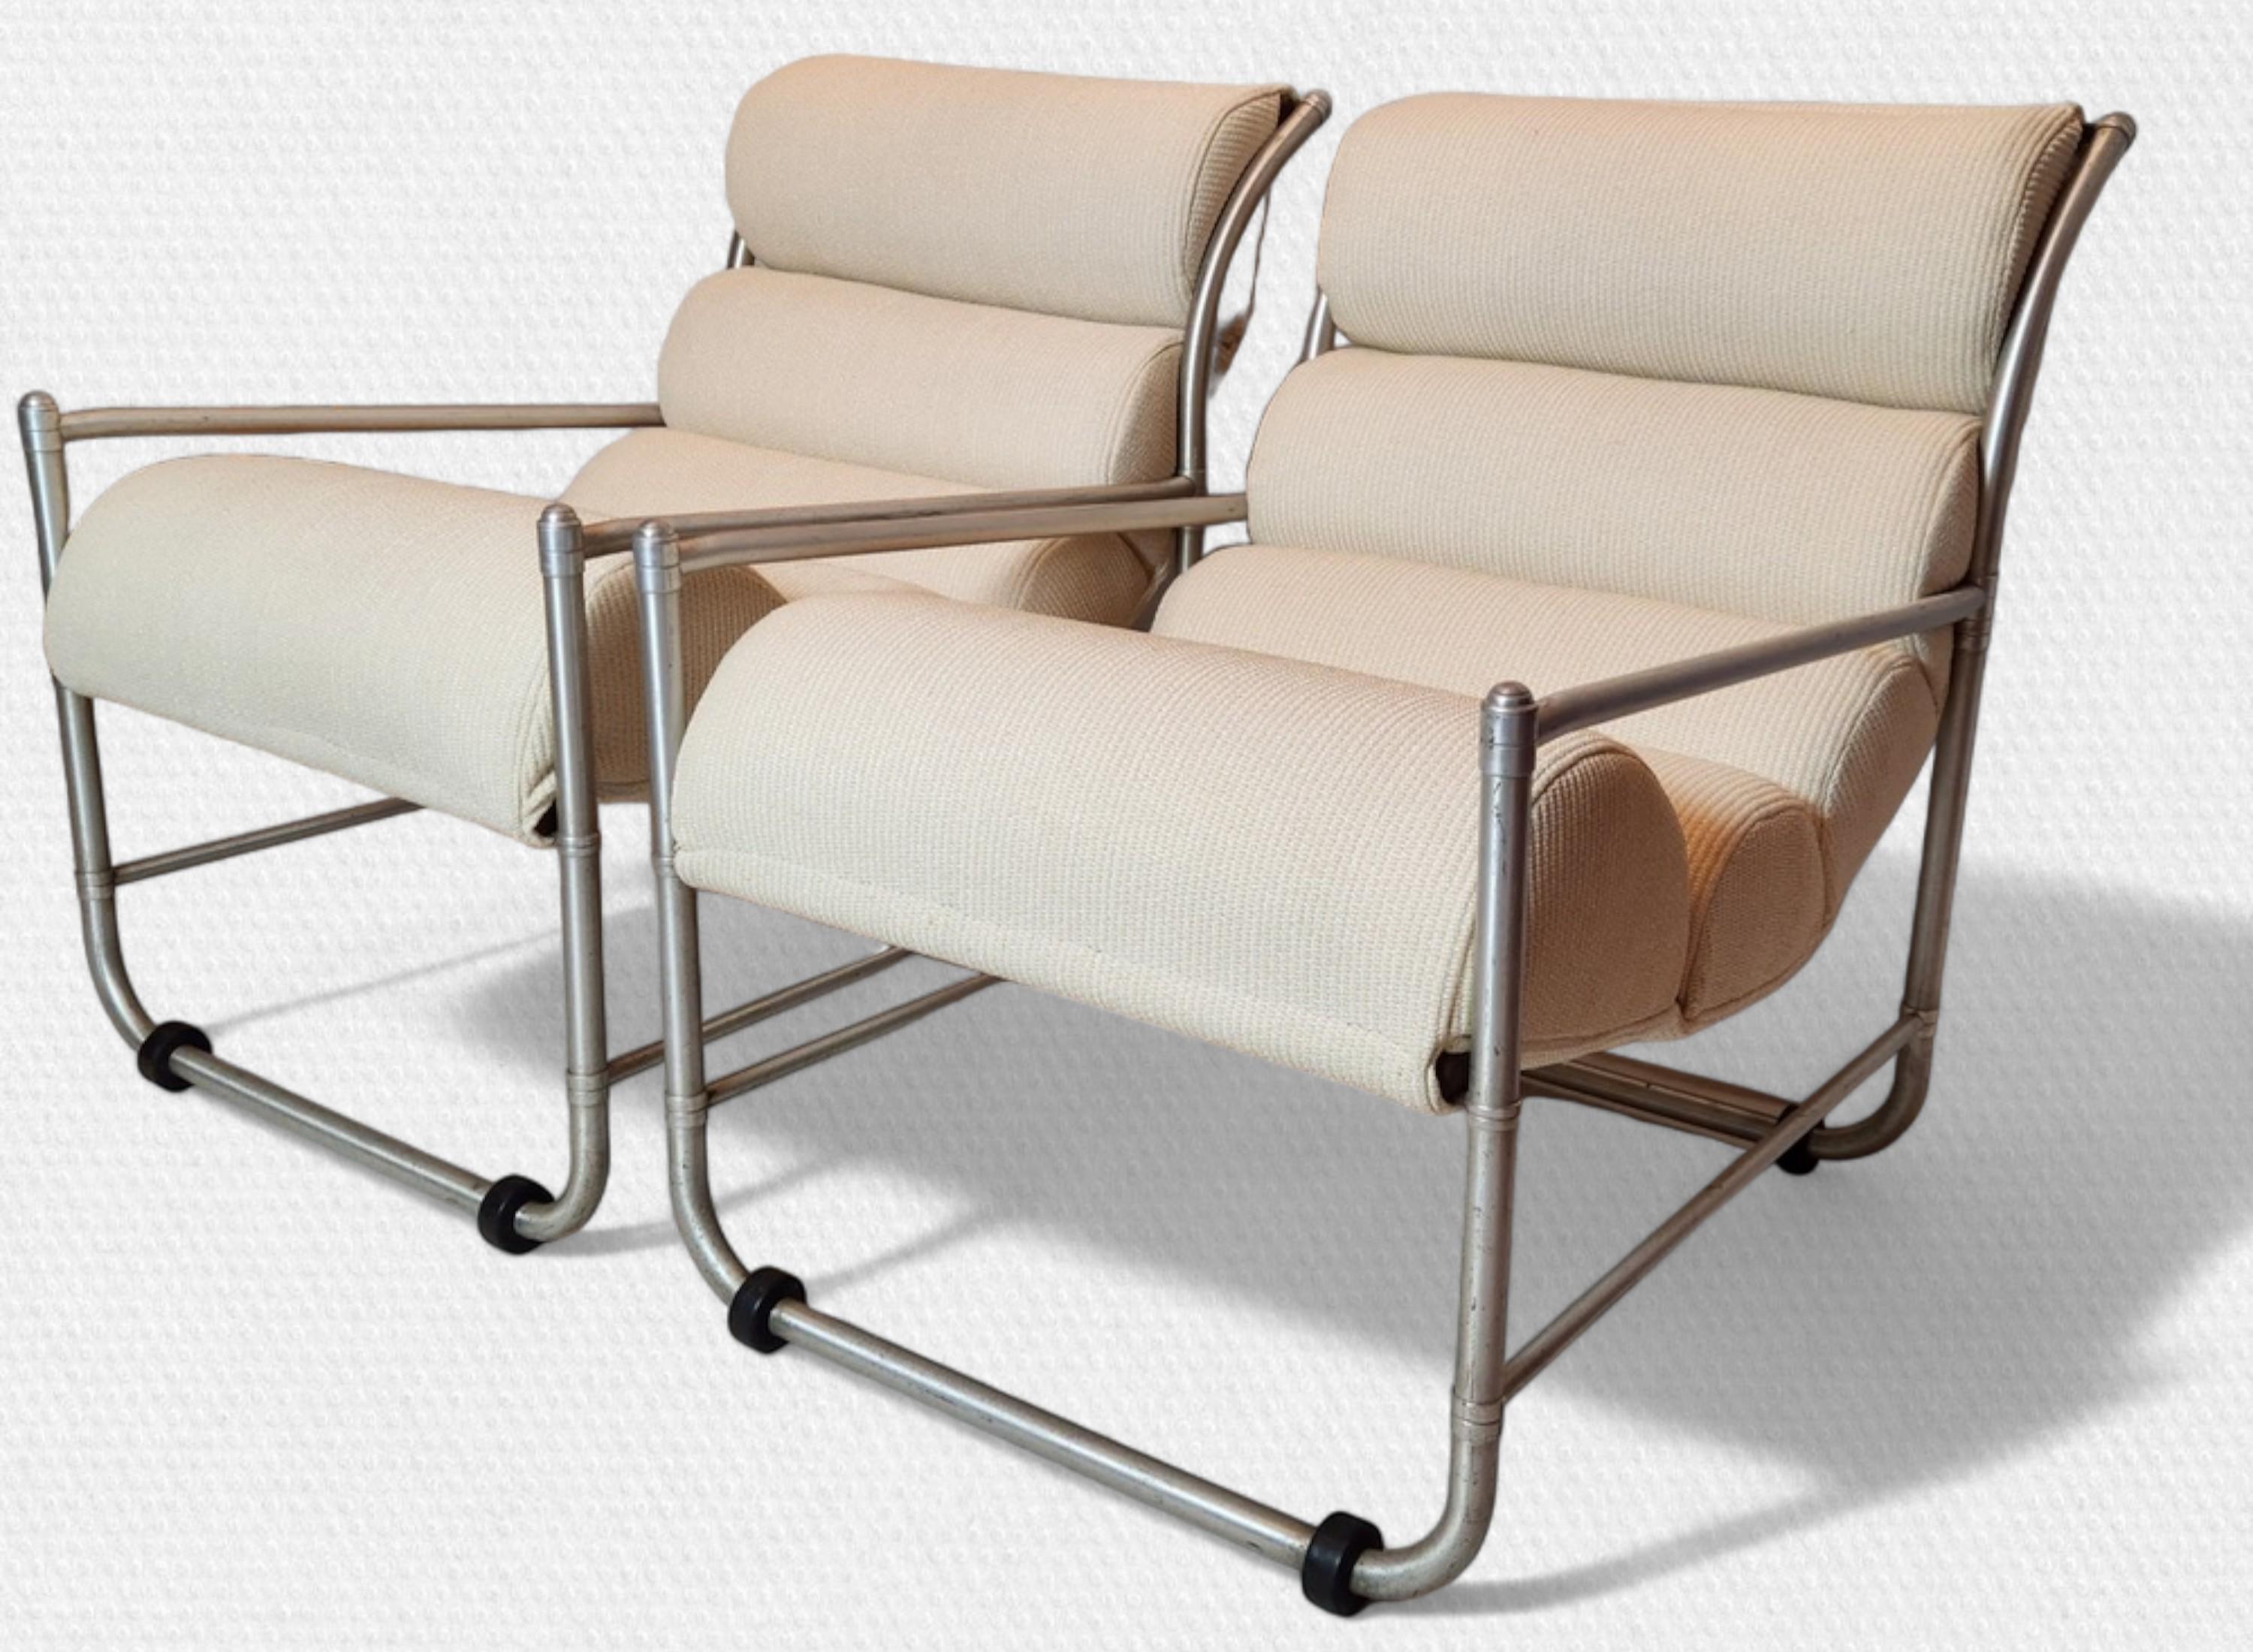 Pair of Aluminum Warren McArthur Sling Chaises / Lounge Chairs, 1938 For Sale 2